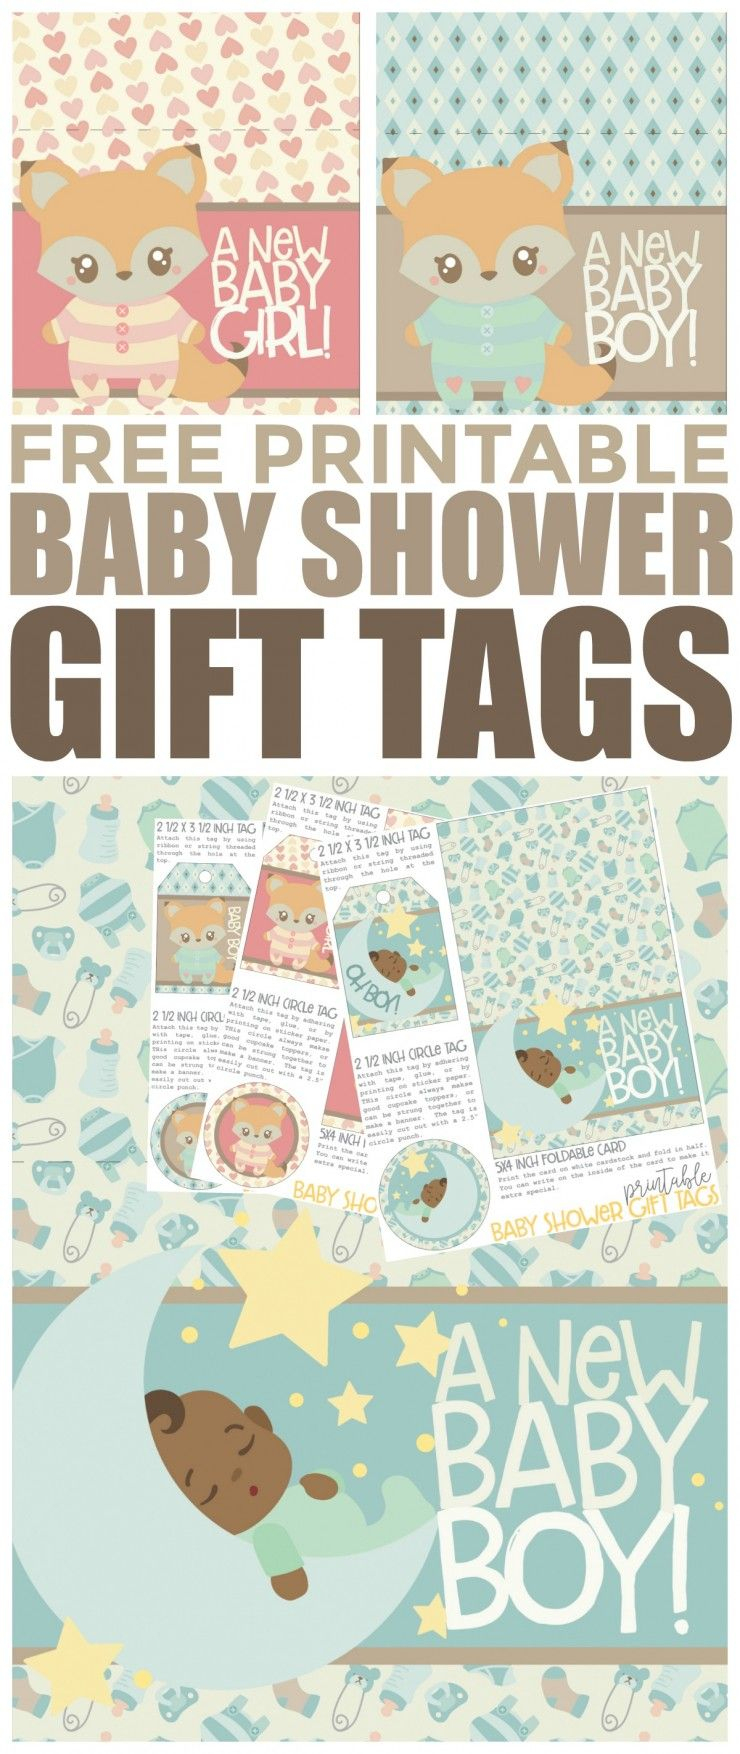 Free Printable Baby Shower Gift Tags | Free Printables | Pinterest - Free Printable Baby Shower Gift Tags